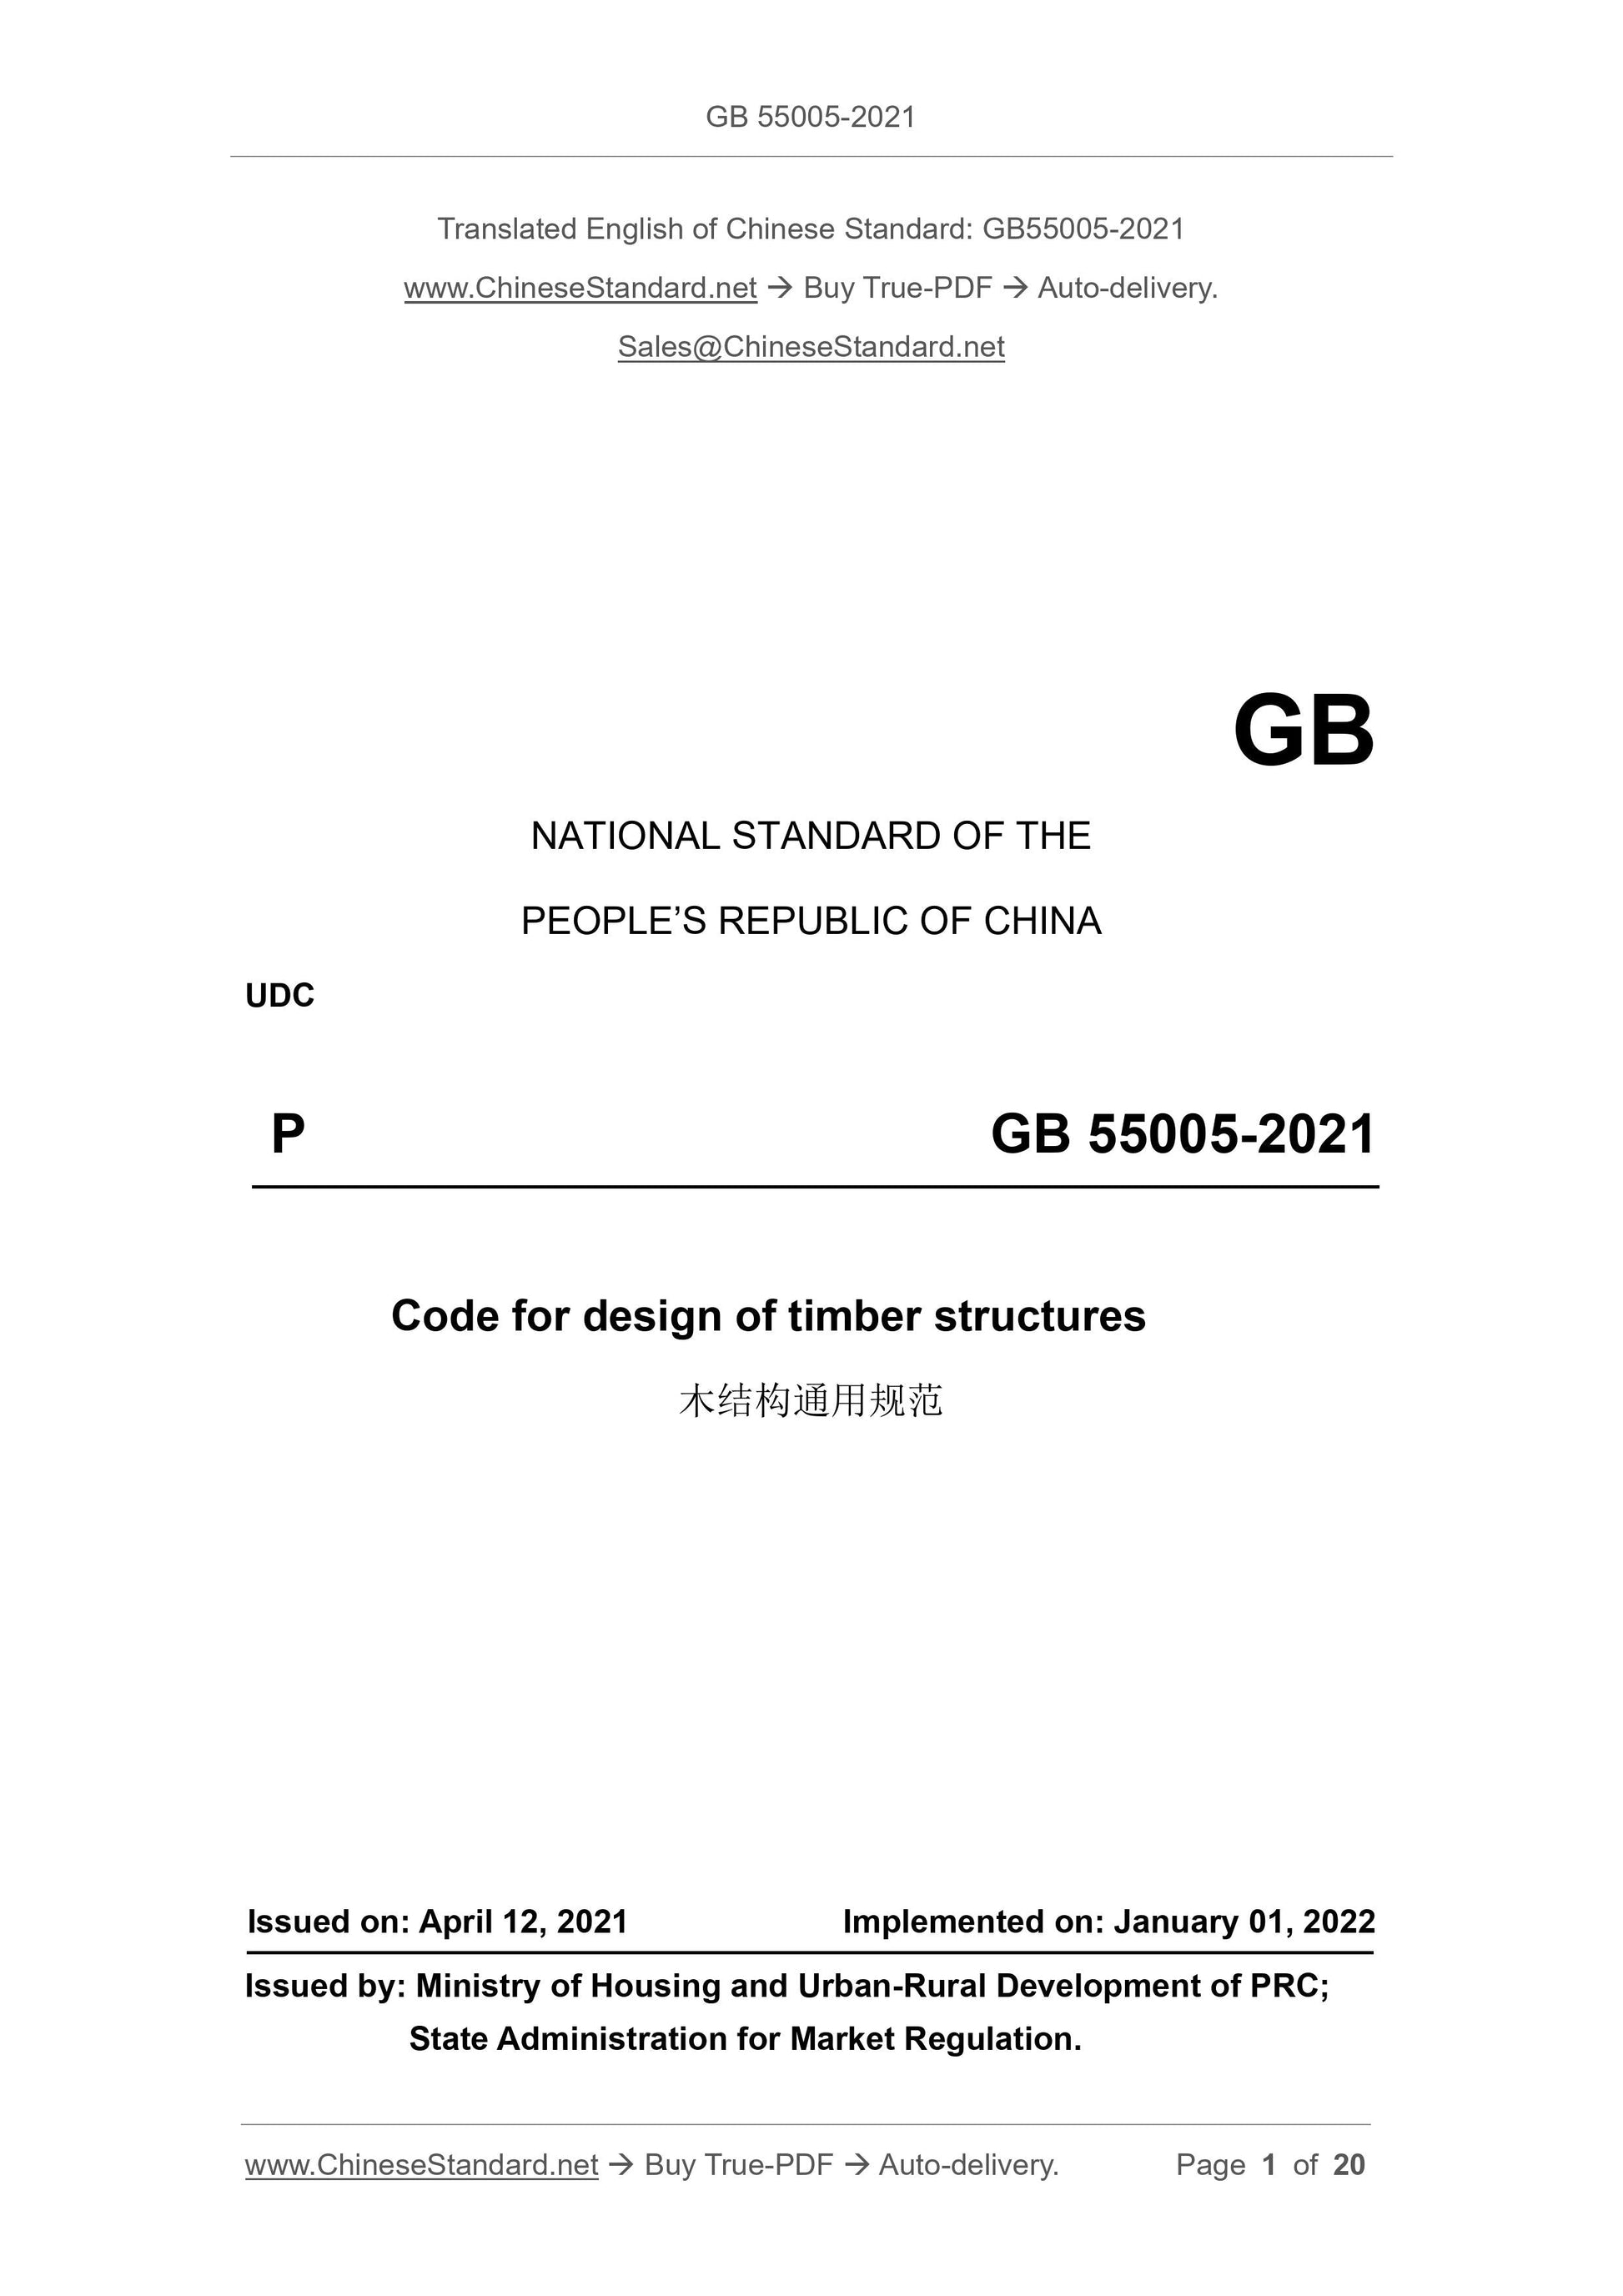 GB 55005-2021 Page 1